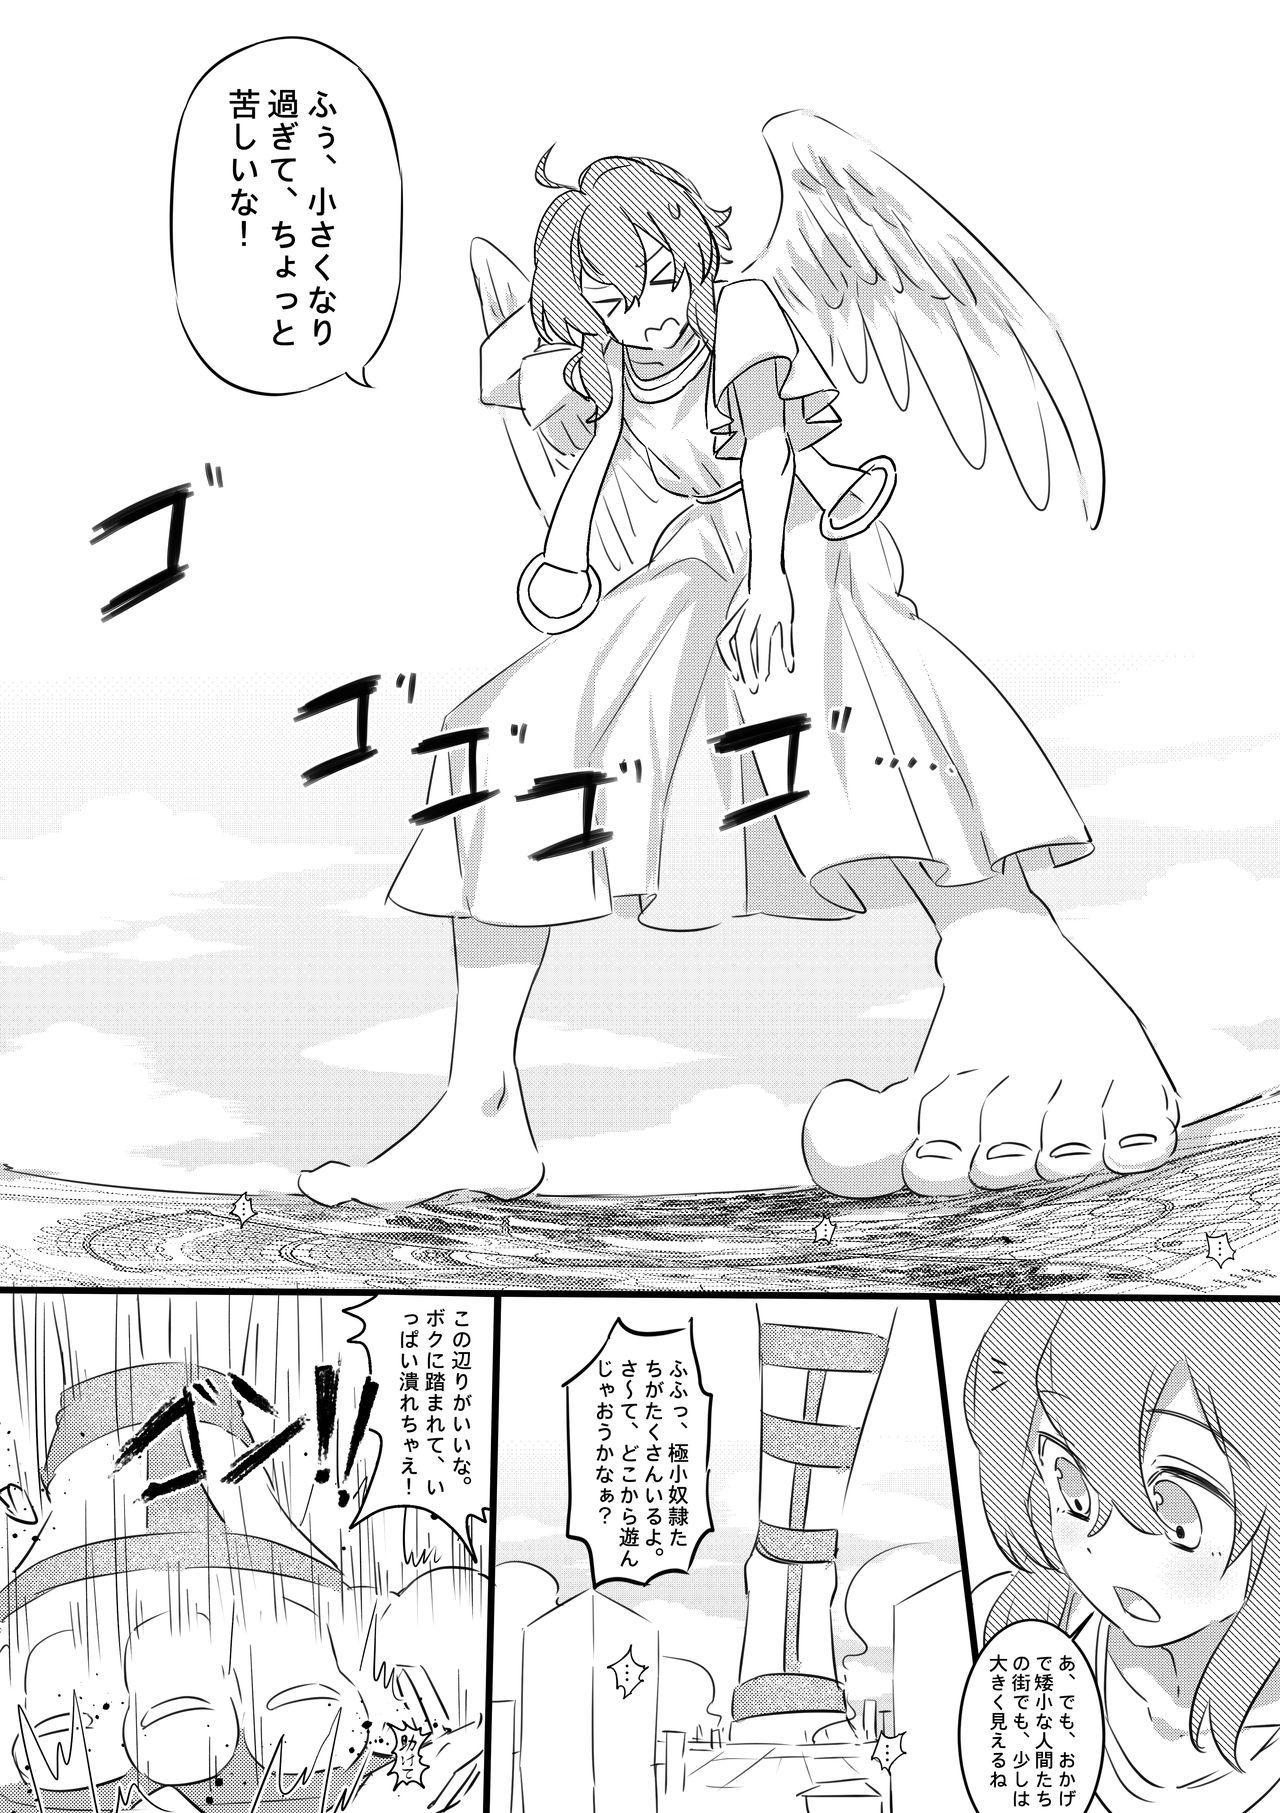 Adorable Angels Turn - Ensemble stars White Girl - Page 6